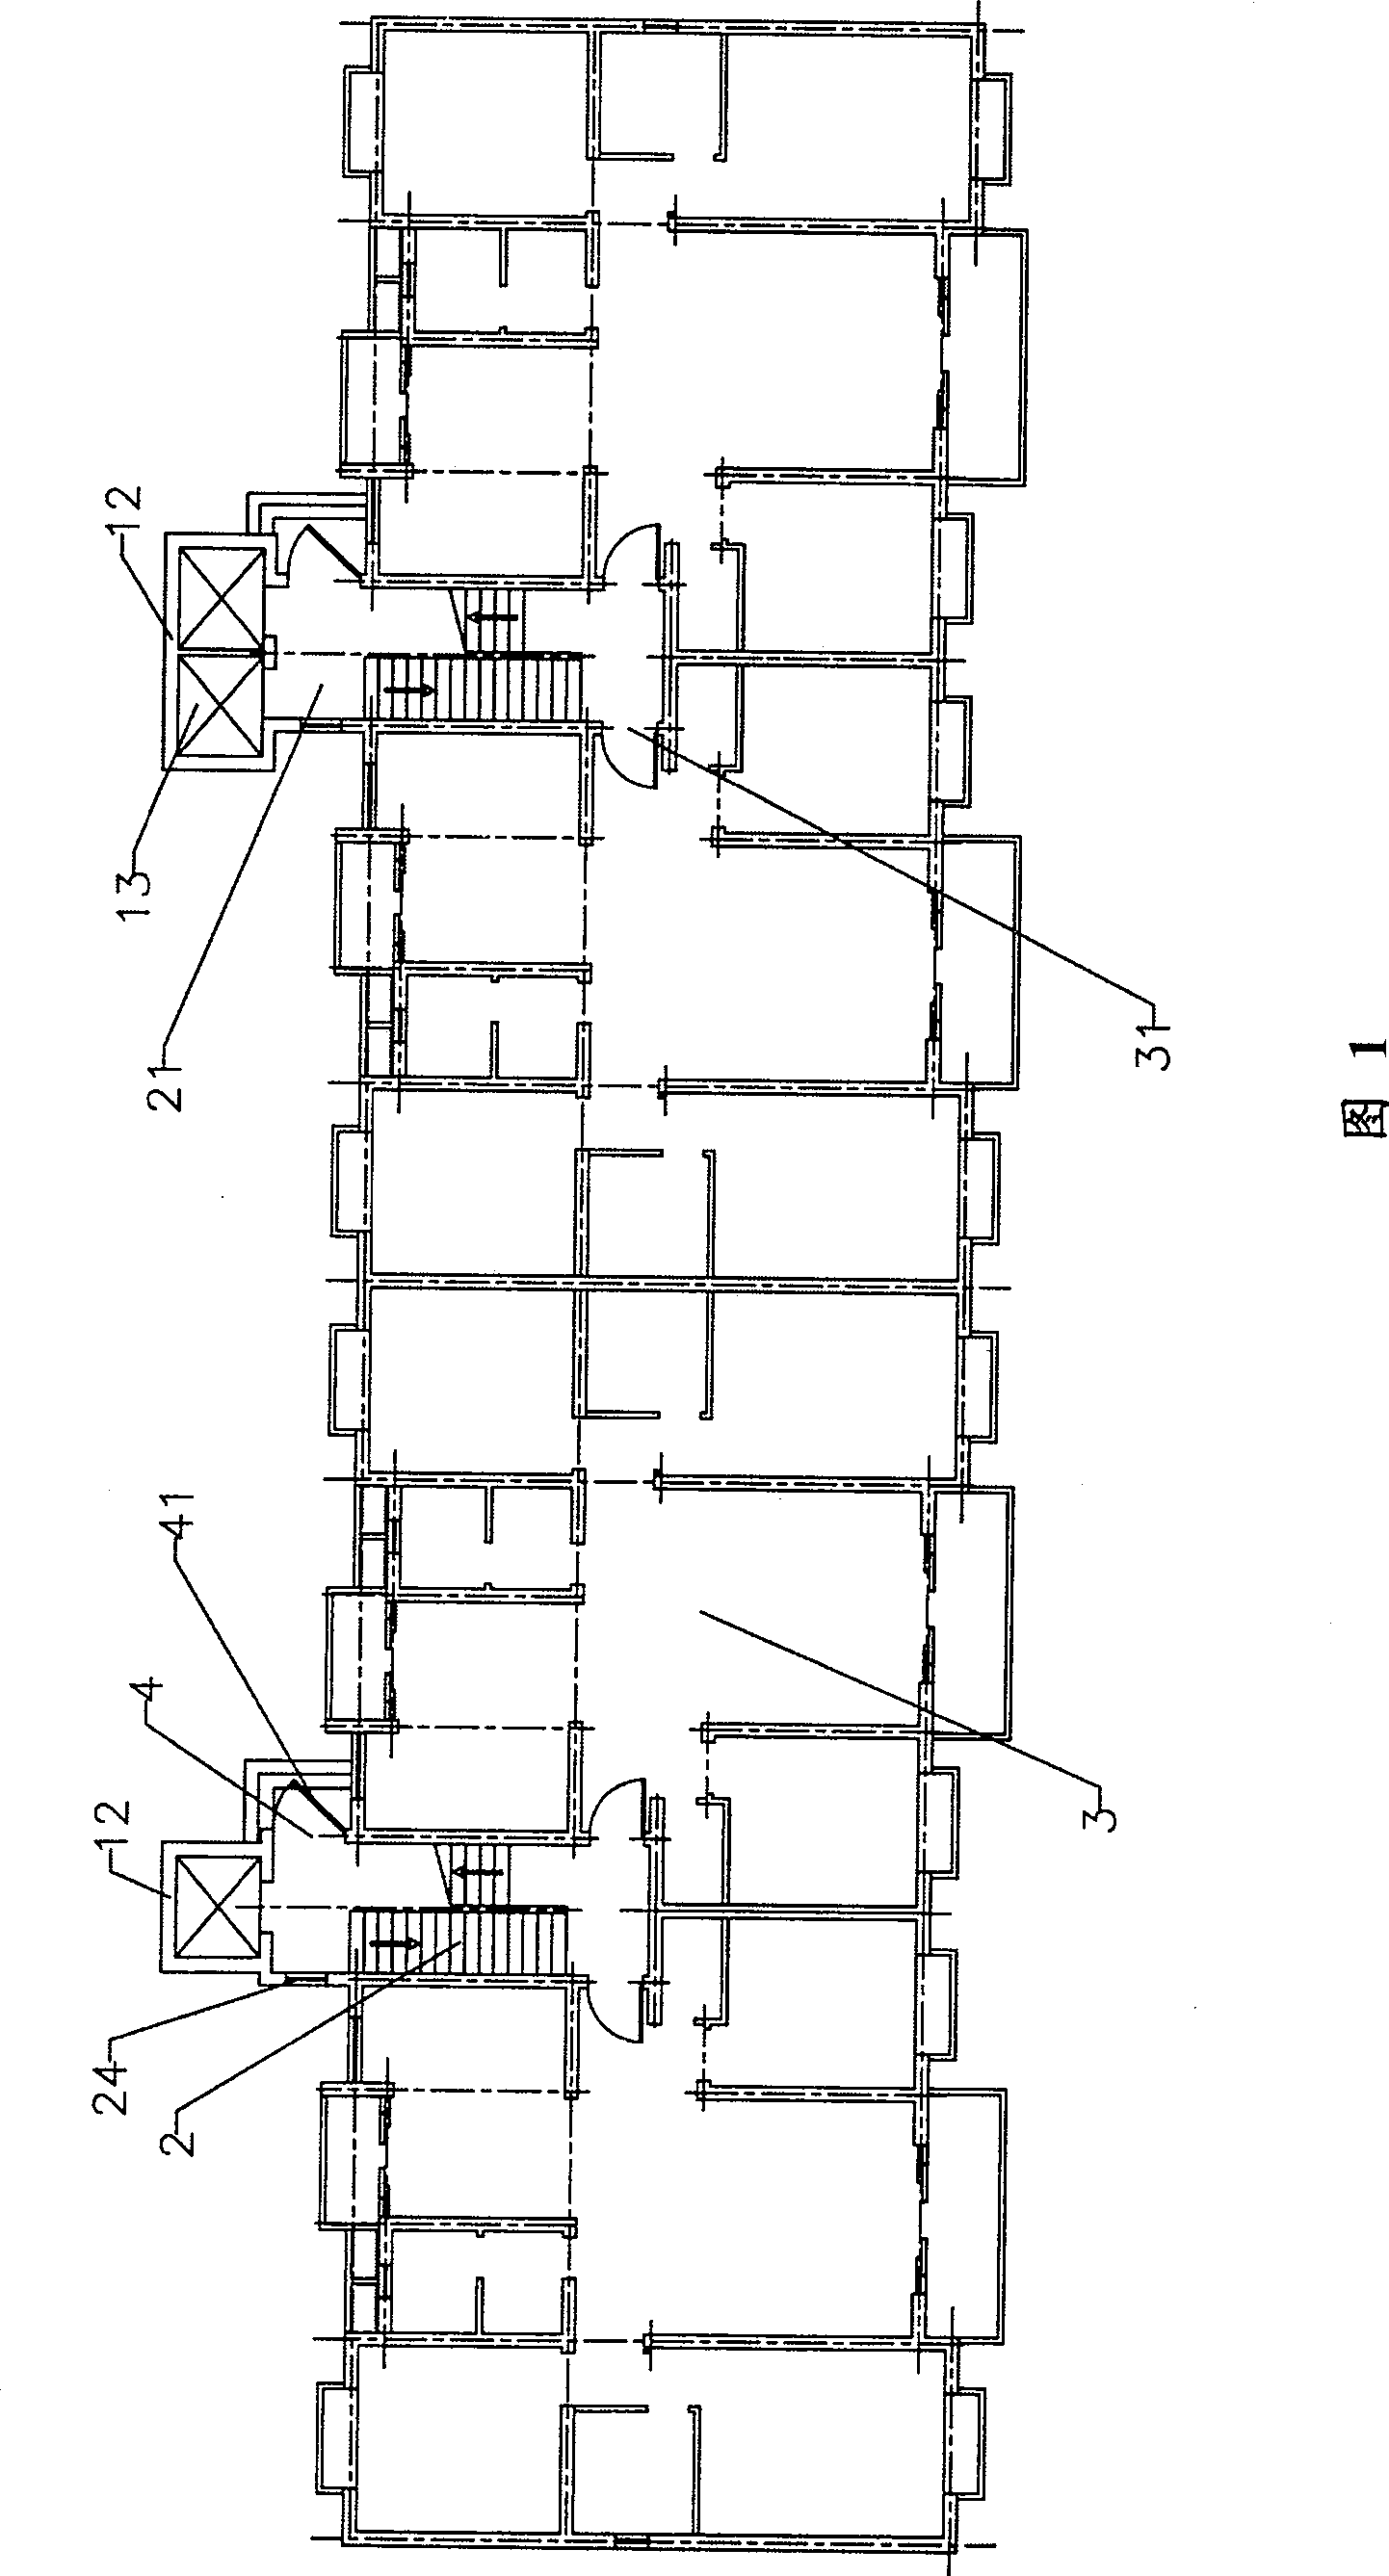 A sharing structure of storied building elevators and stairs